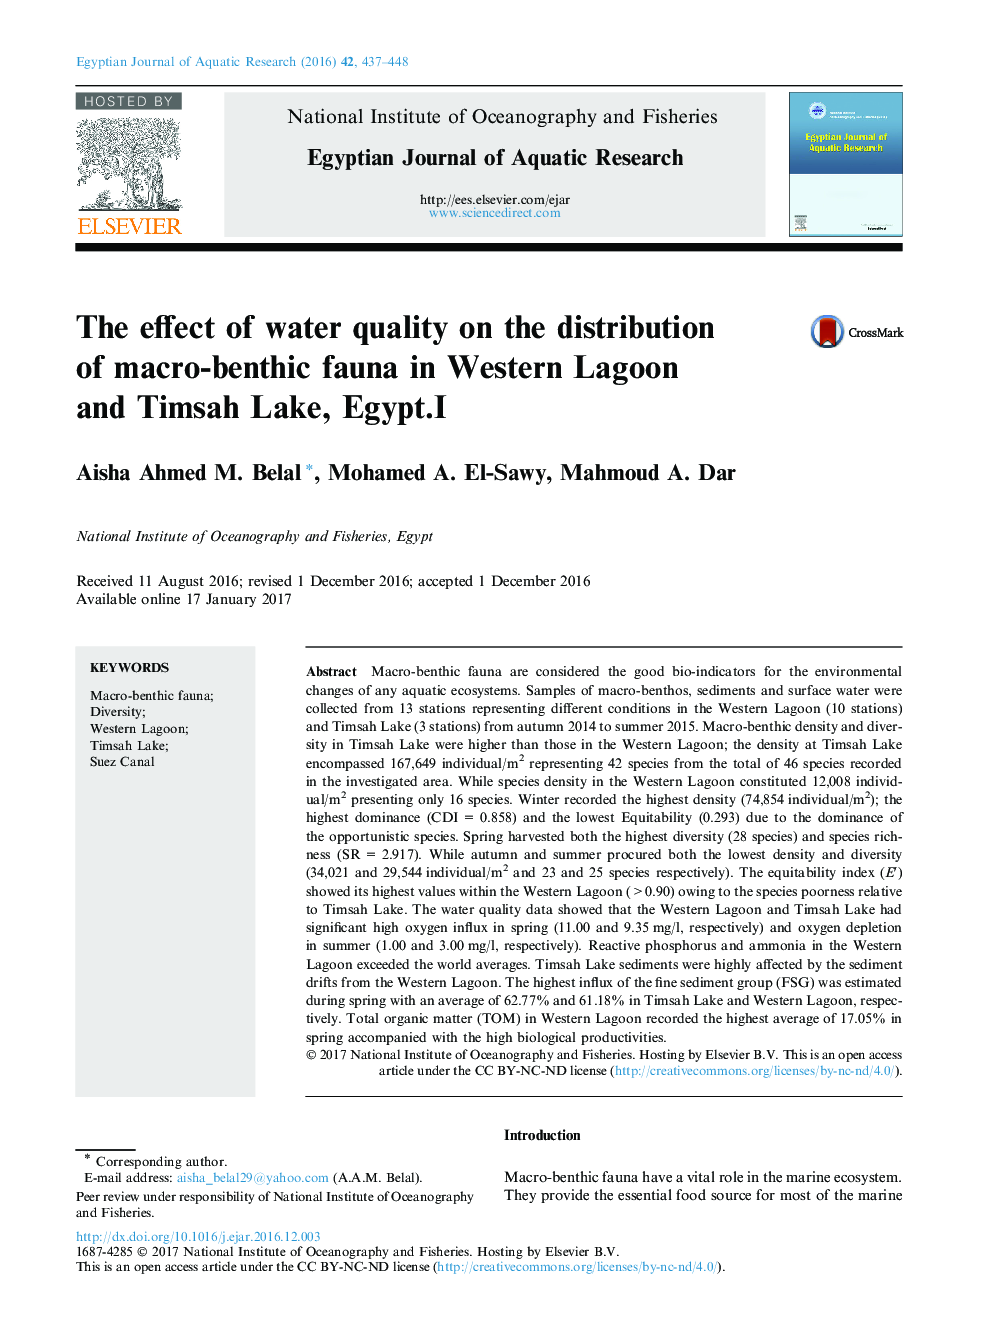 The effect of water quality on the distribution of macro-benthic fauna in Western Lagoon and Timsah Lake, Egypt.I